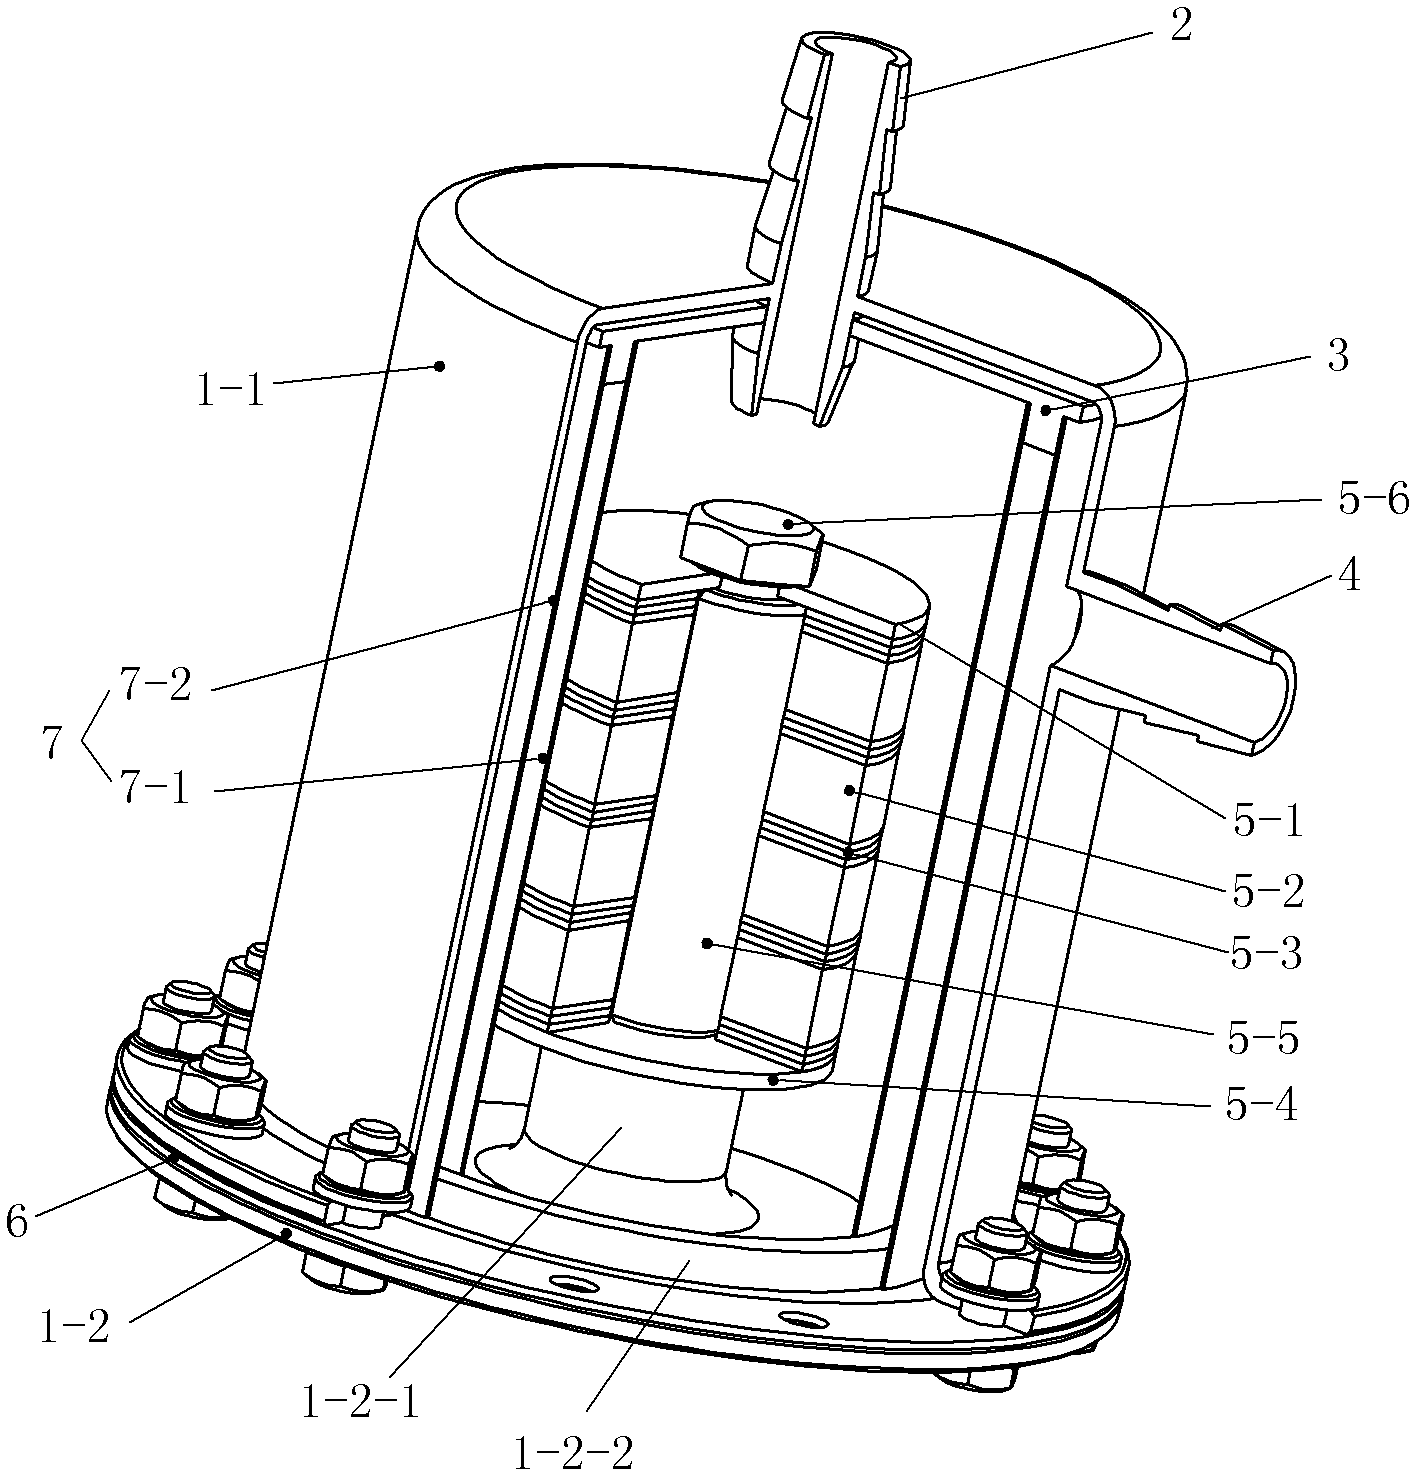 A water filter device